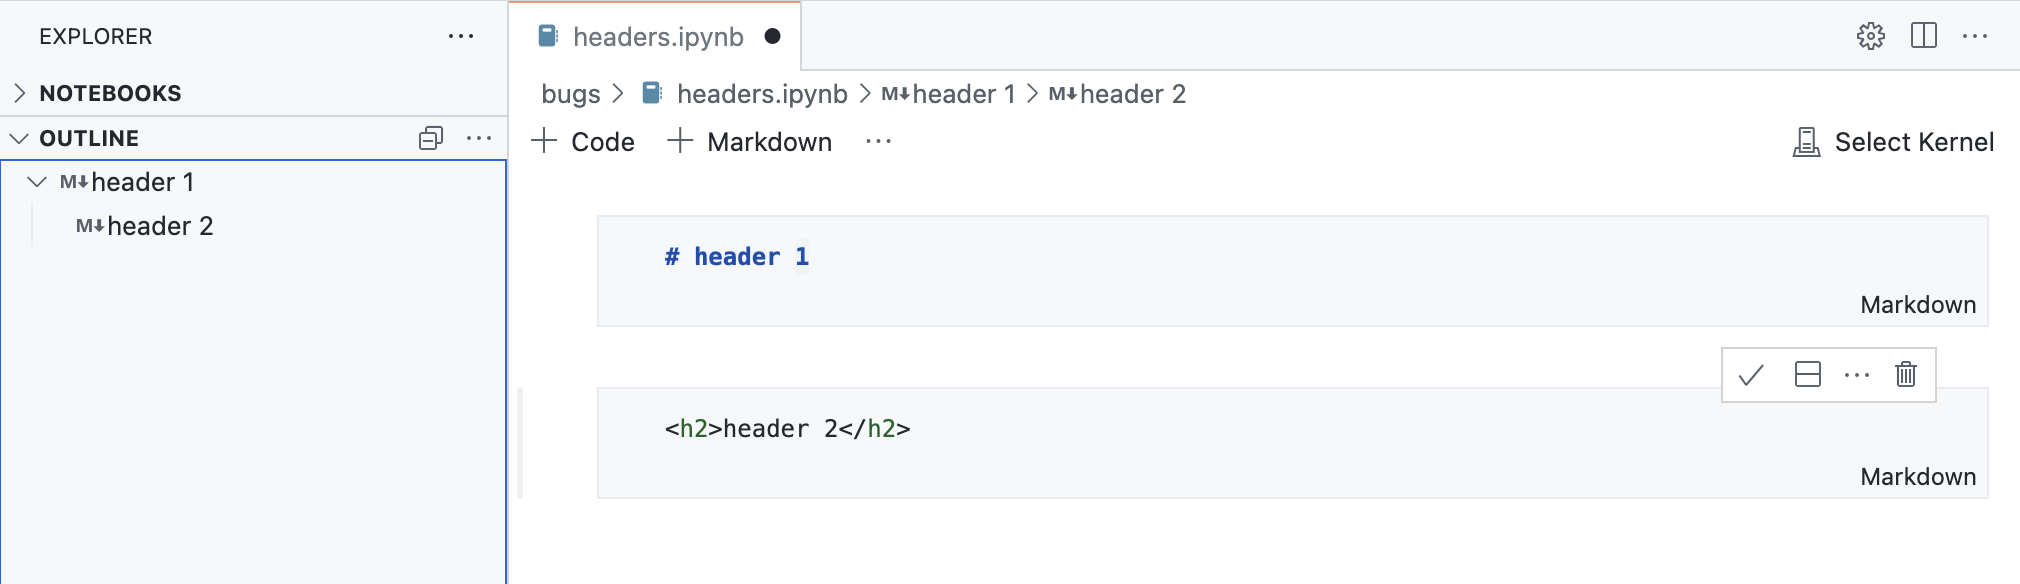 HTML headers in notebook Markdown cells